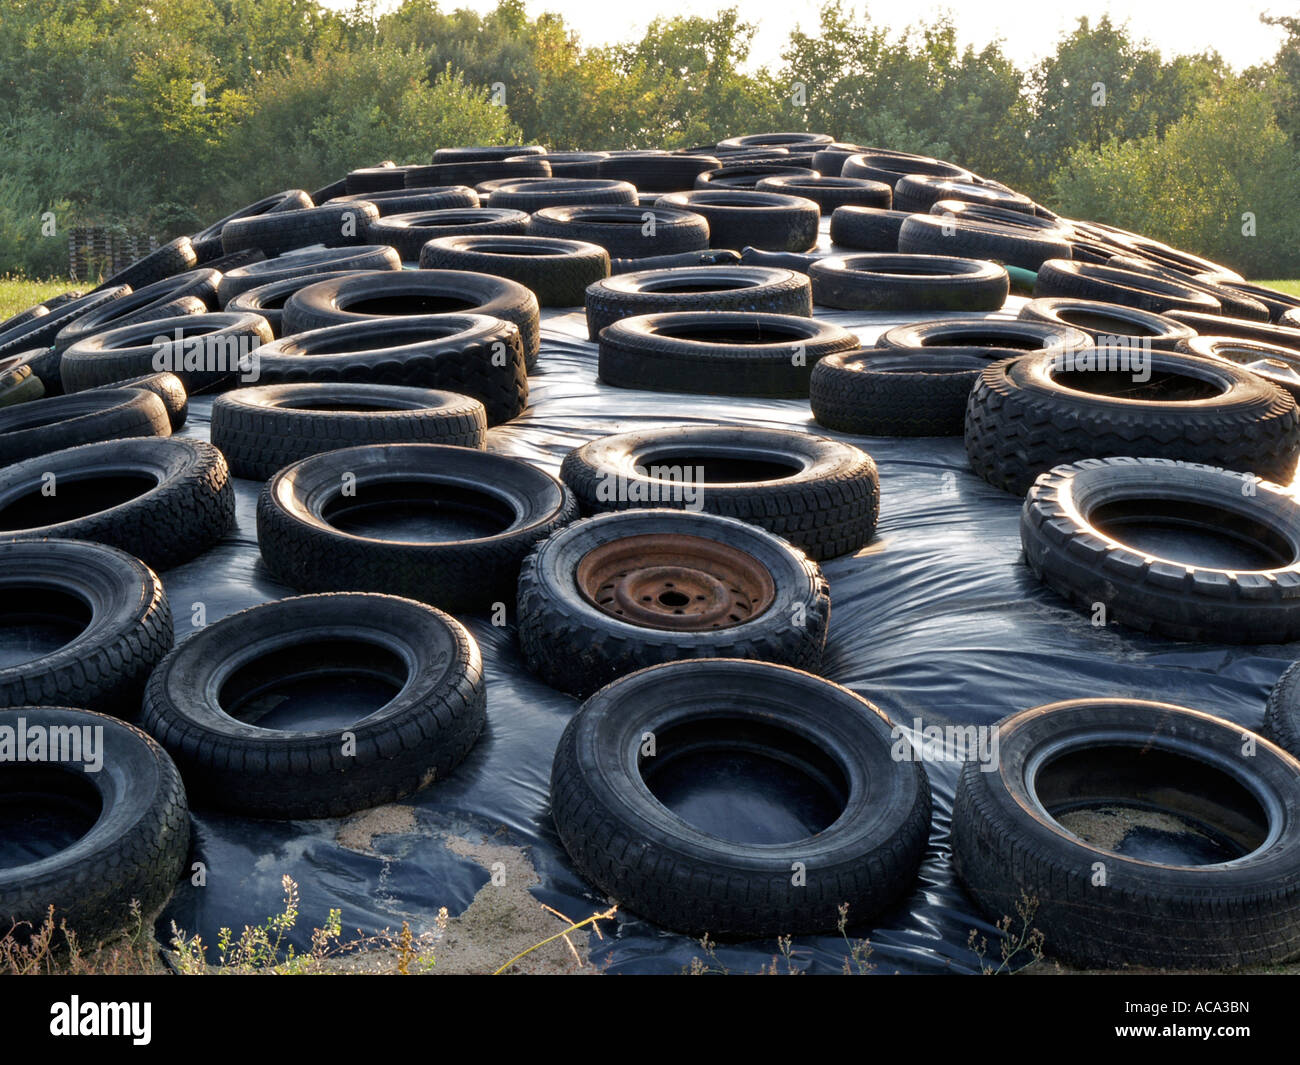 Car tires cover a dunghill Stock Photo